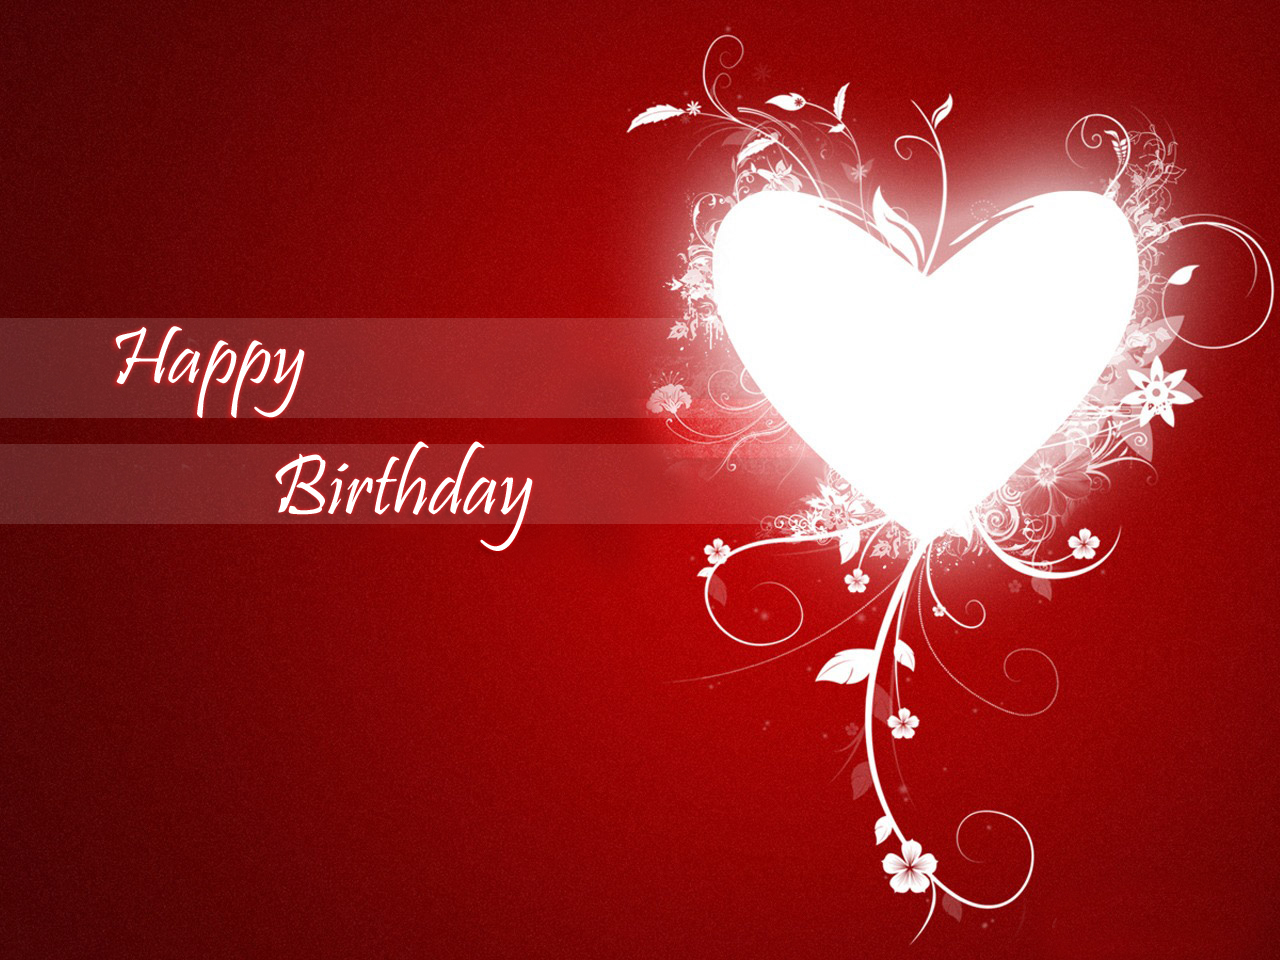  and photo new birthday love wishes wallpaper download 1280x960